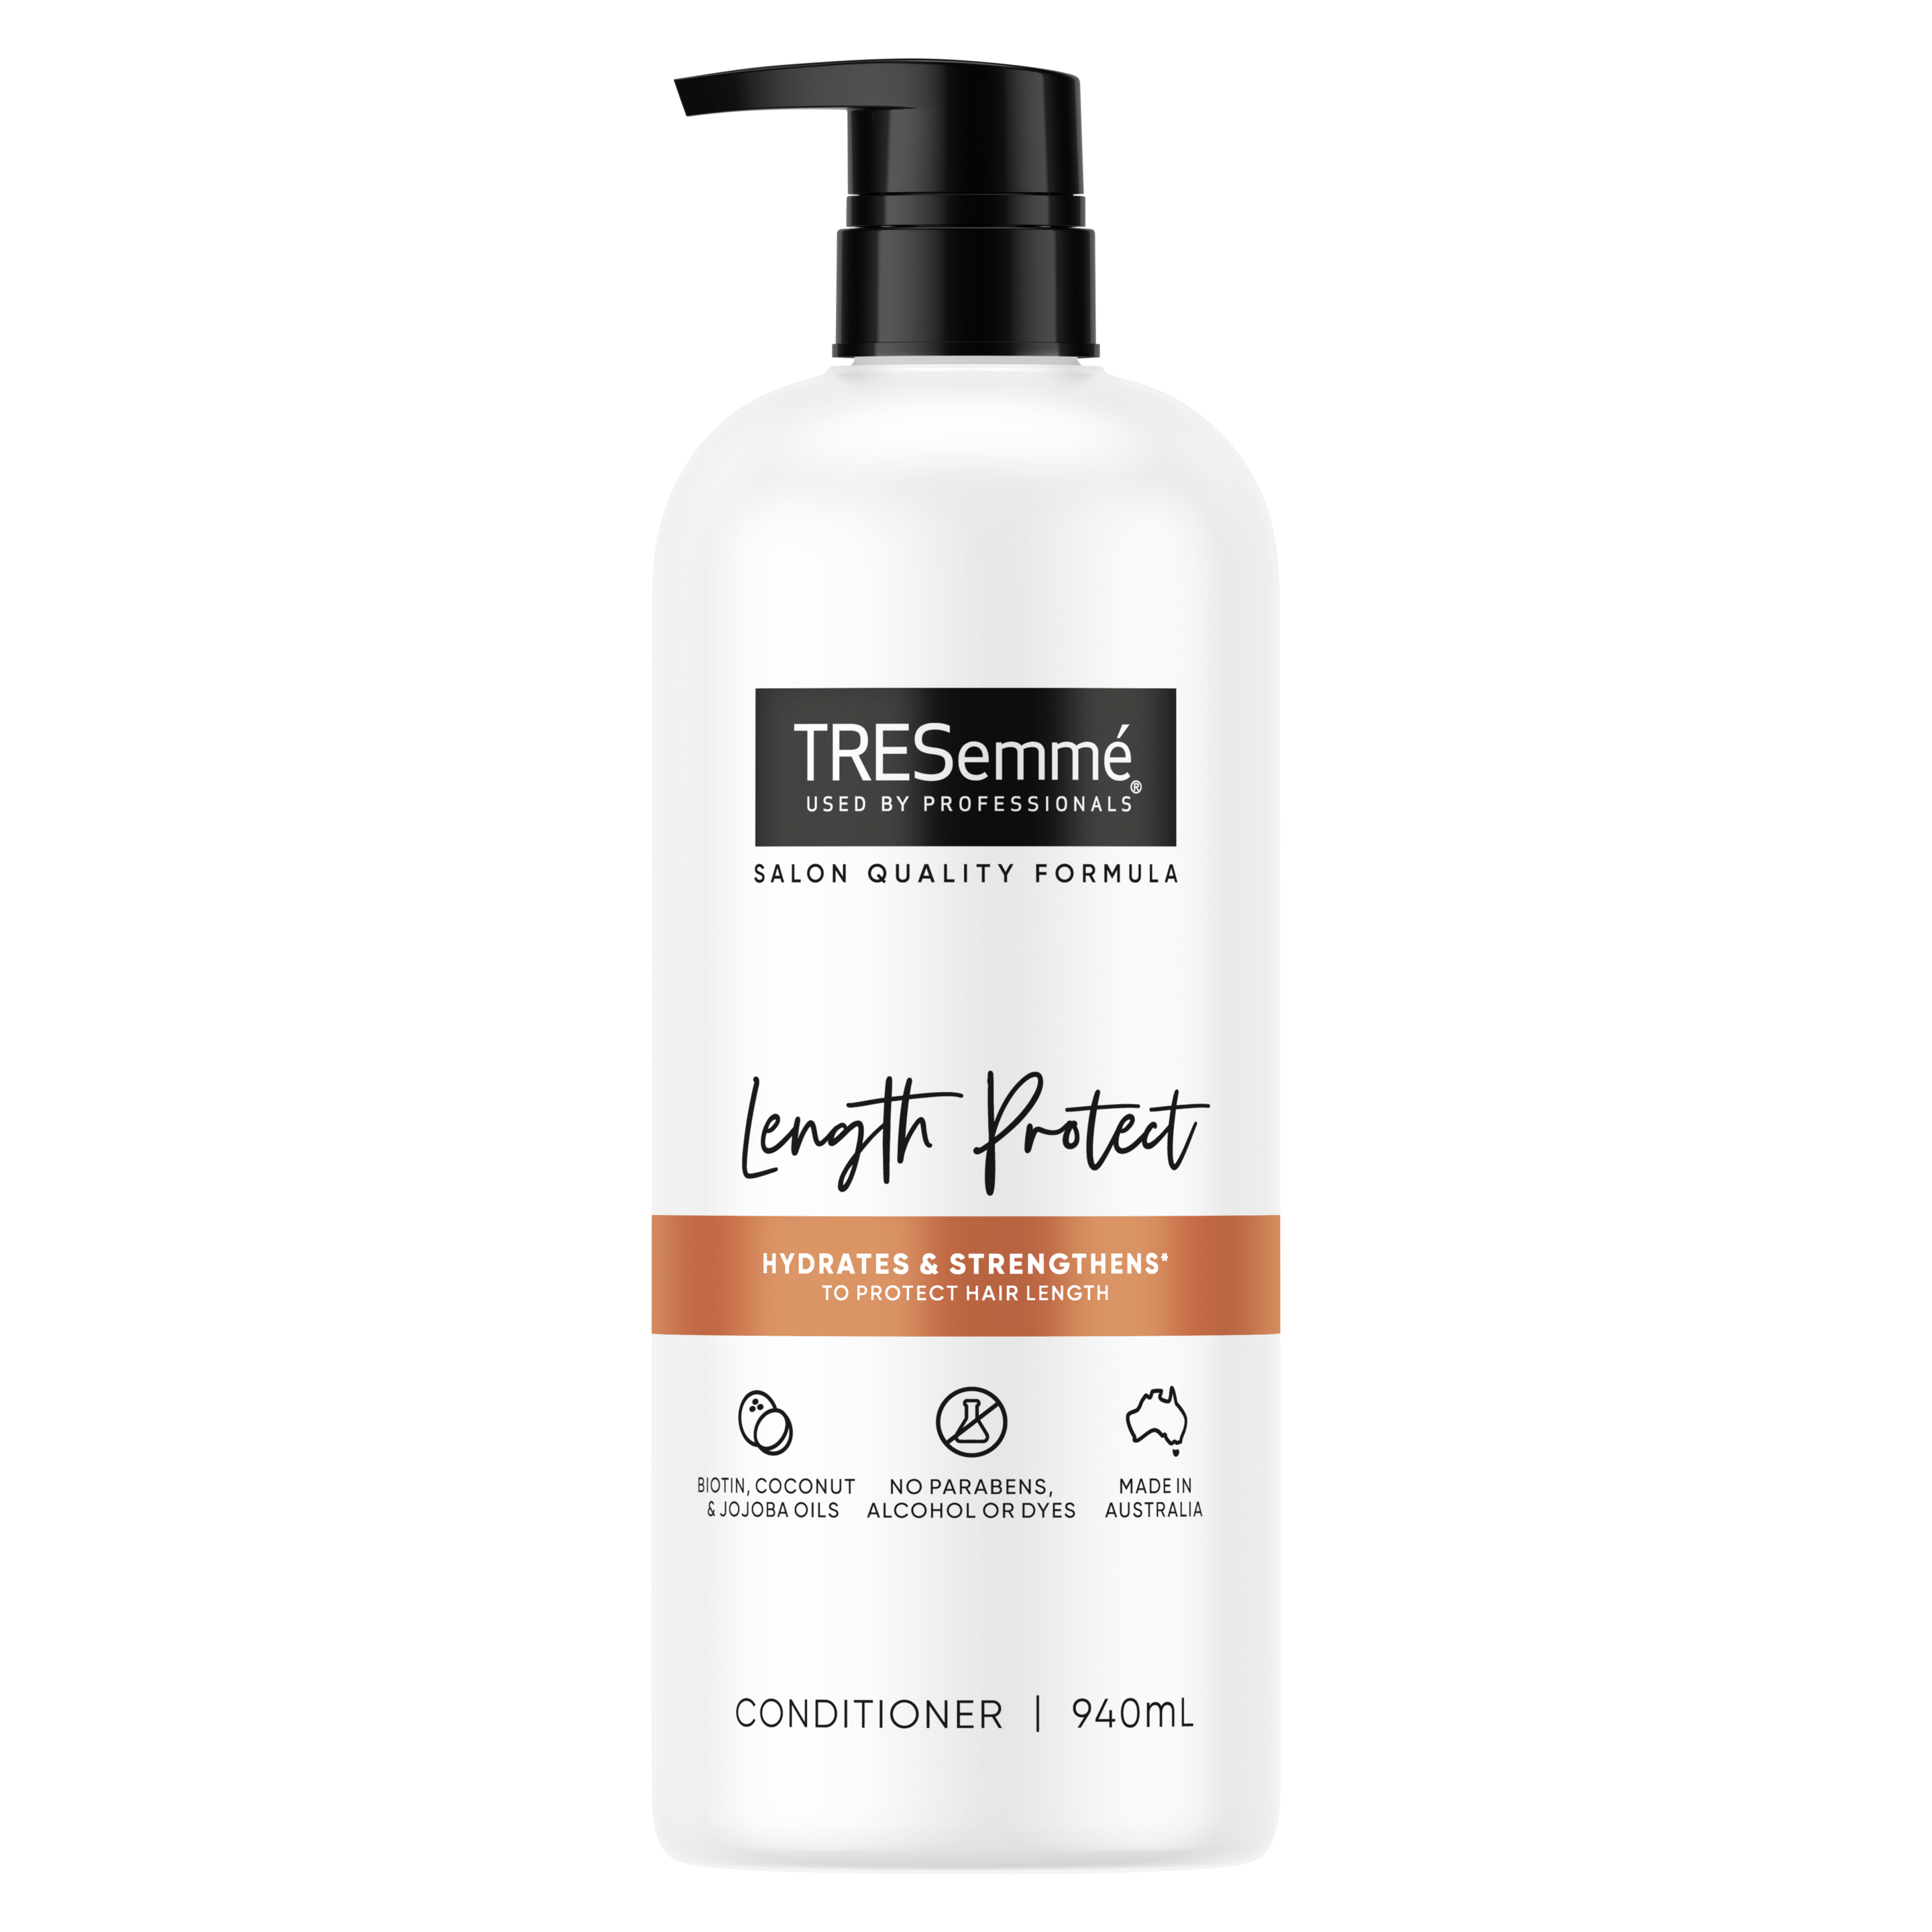 A 940ml bottle of TRESemmé Length Protect Conditioner